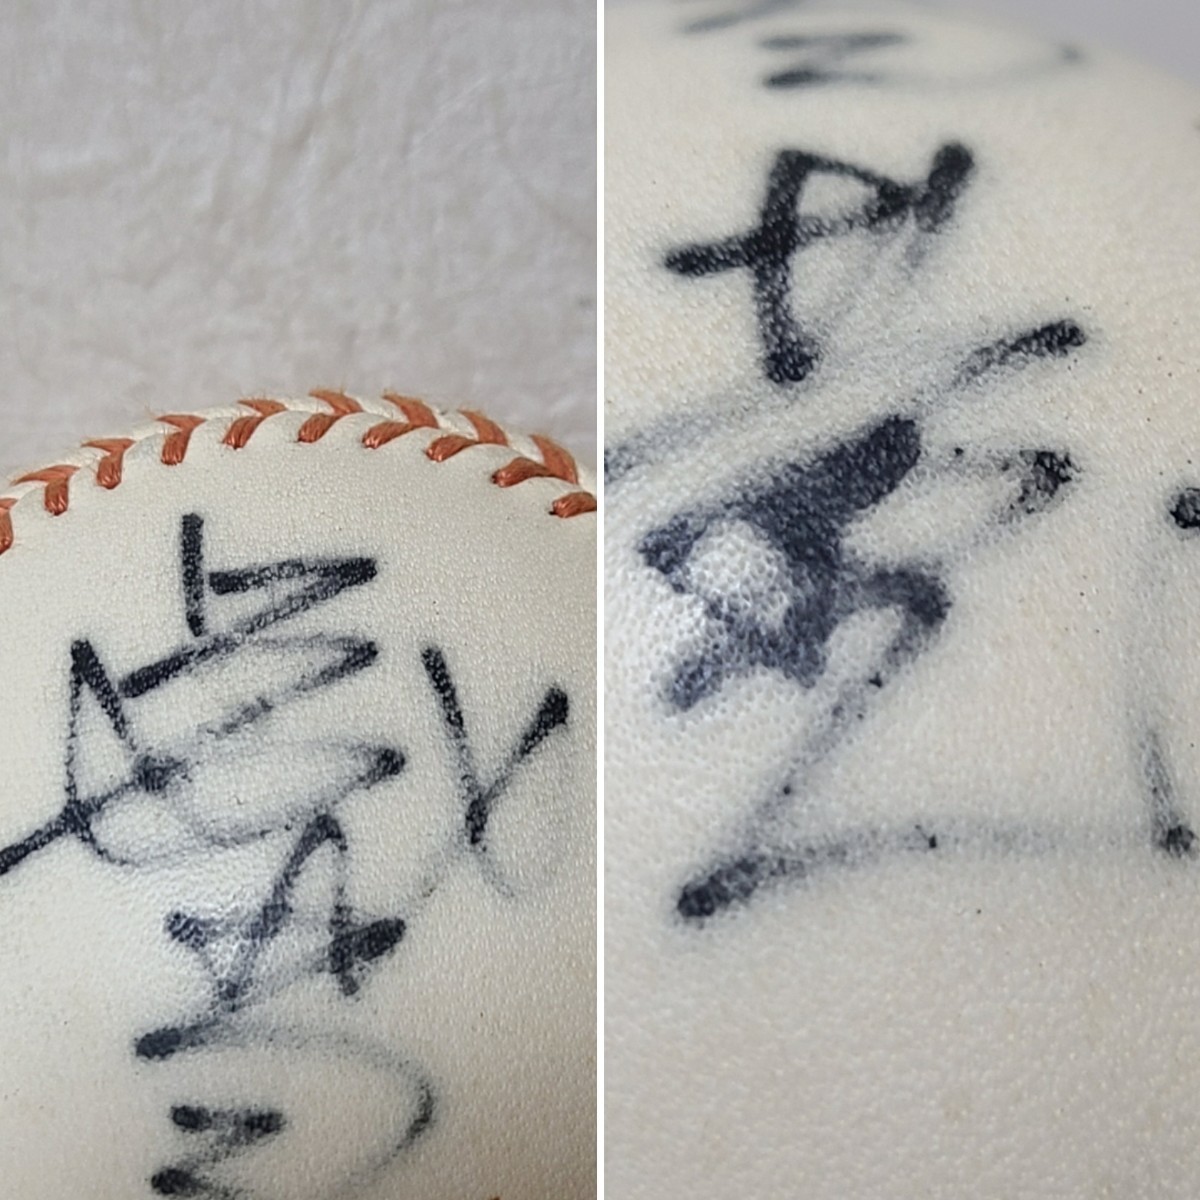  autograph autograph ball autograph baseball autograph Taiyou ho e-ruz Fukushima ... number 10 another present . direction height tree . one 6 number whales that time thing rare 